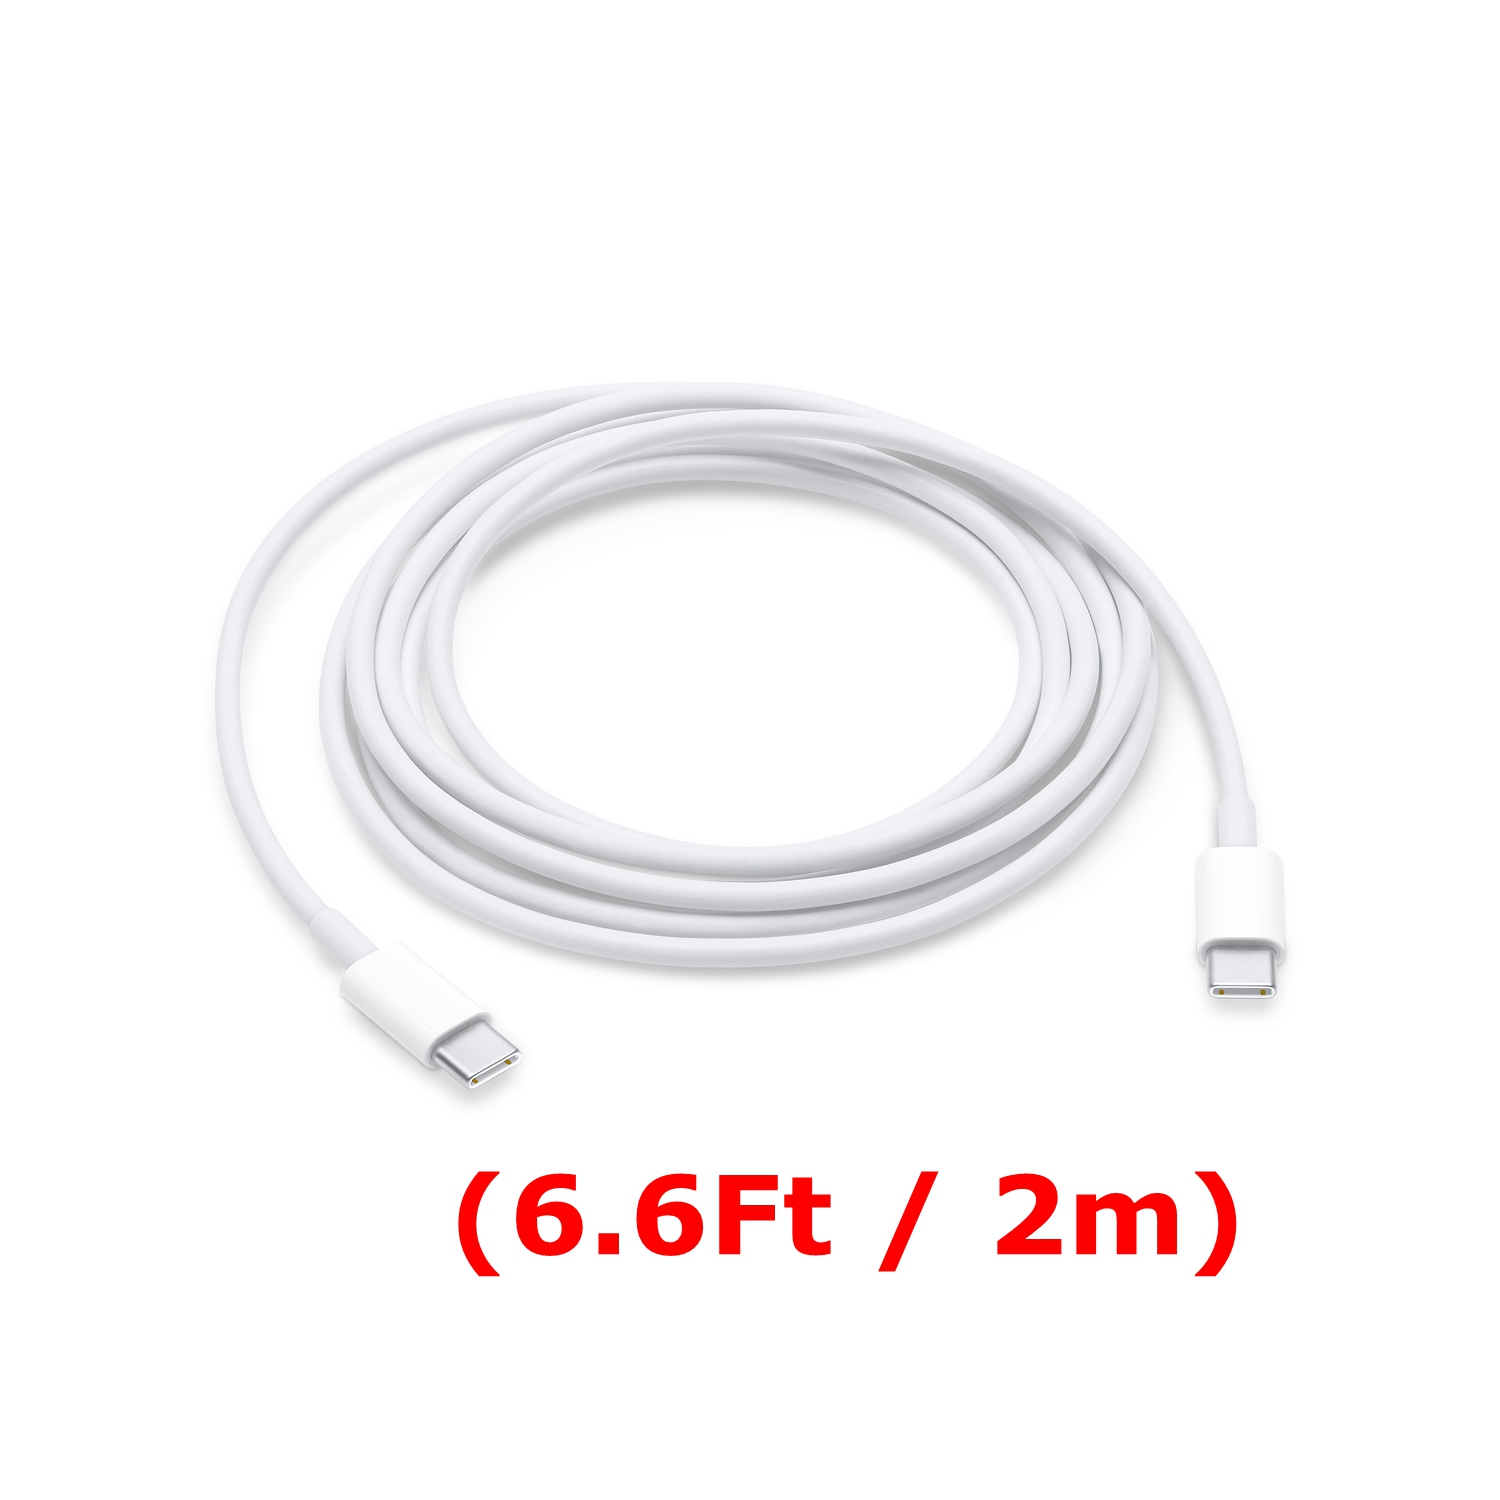 (6.6Ft / 2m) Type USB-C to USB-C Sync & Data Cable Cord for Samsung S8 S9 S10 Note 8 9 iPad Pro MacBook LG Google Pixel Huawei